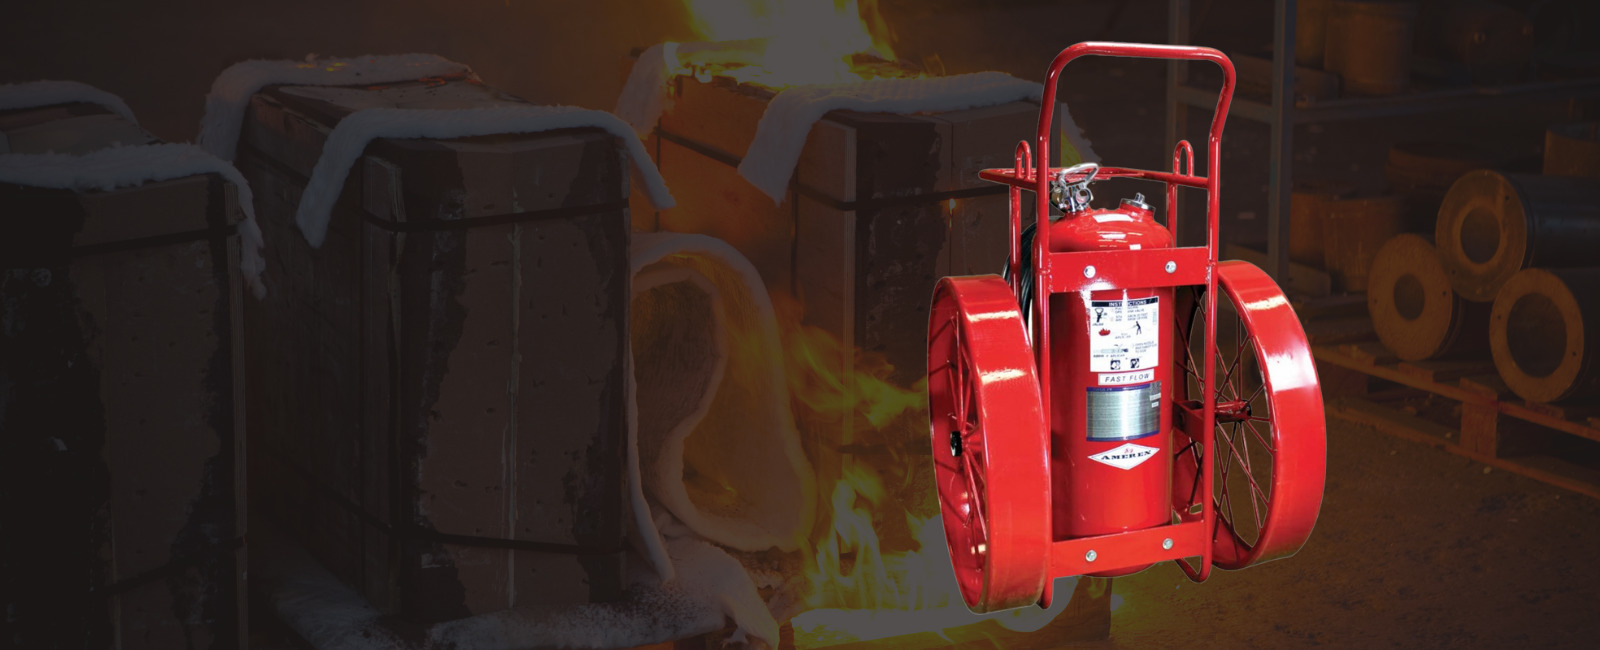 Heavy Duty Industrial Dry Chemical Extinguishers